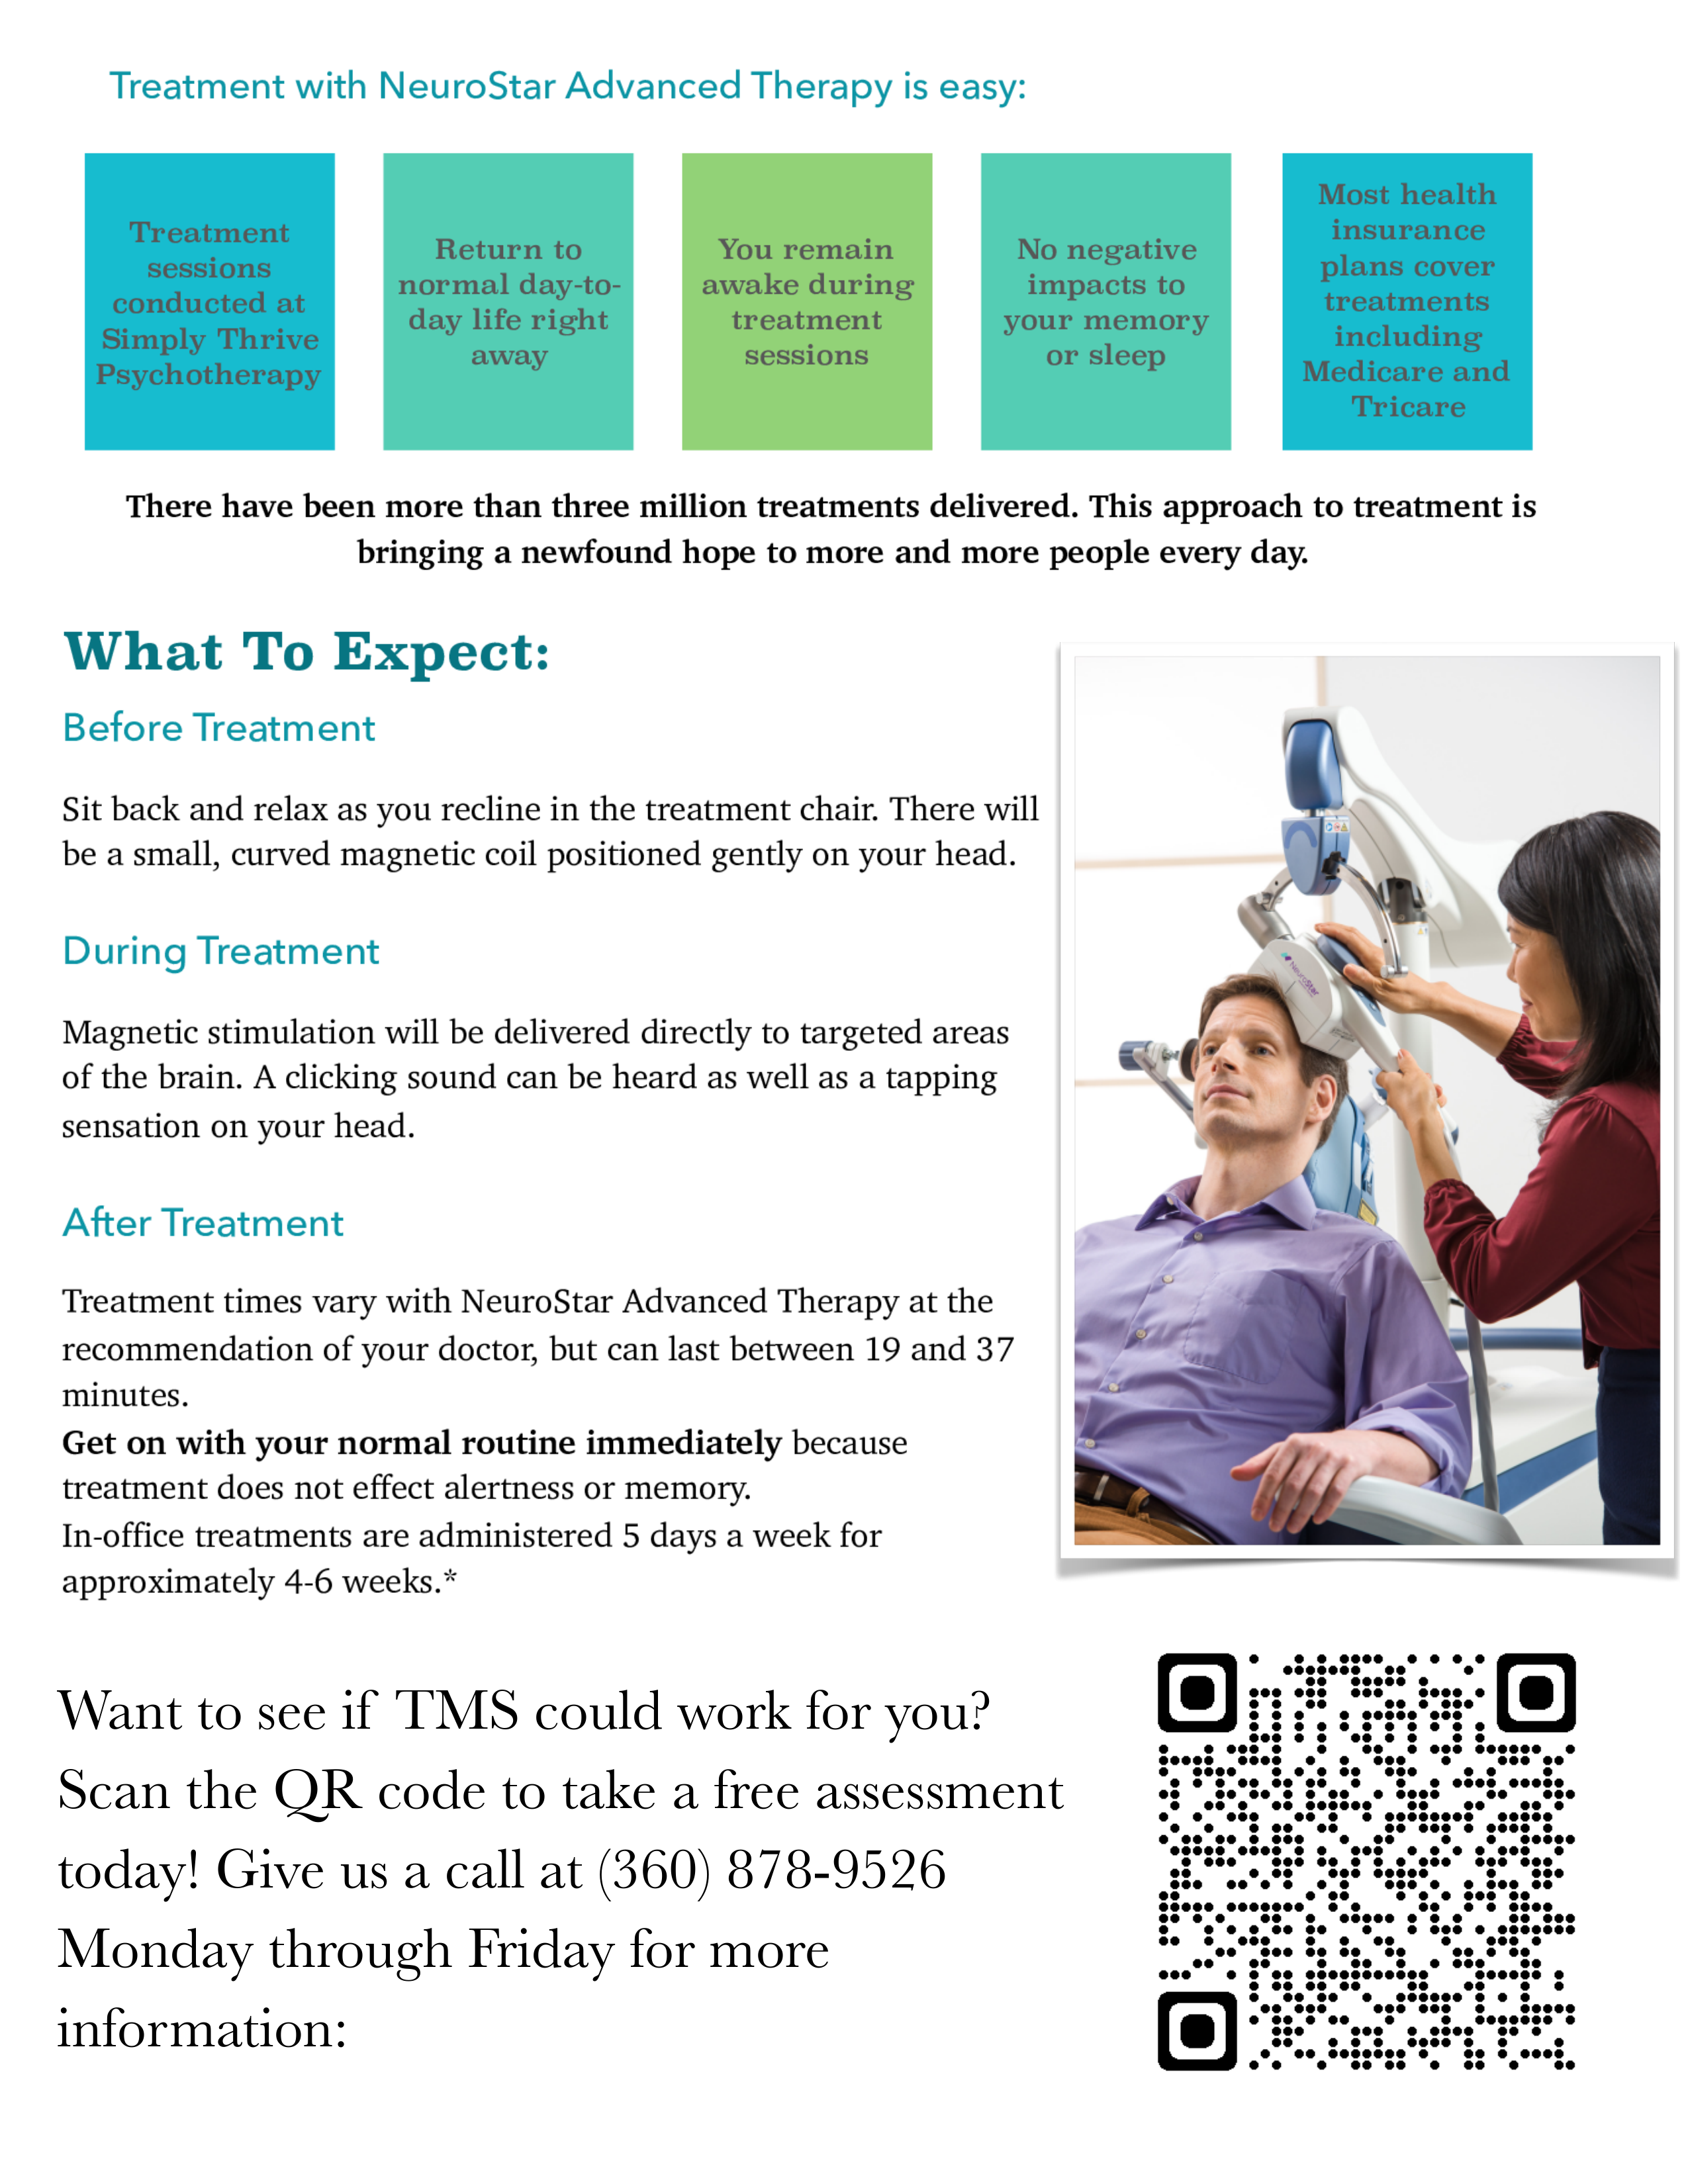 What to expect from TMS and QR code